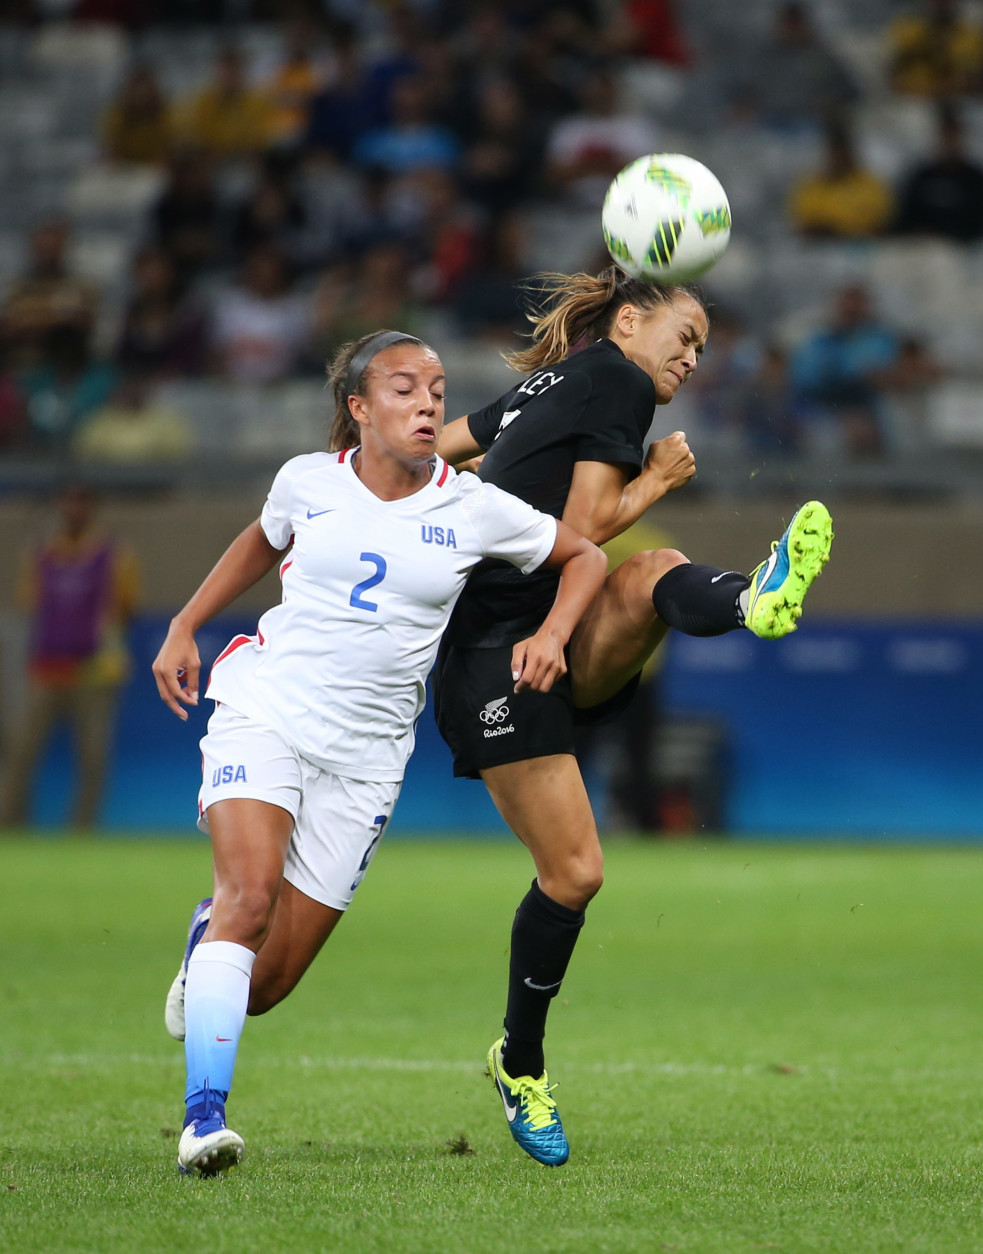 United States' Mallory Pugh, left, and New Zealand's Ali Riley vie for the ball during a Women's Olympic Football Tournament match at the Mineirao stadium in Belo Horizonte, Brazil, Wednesday, Aug. 3, 2016. (AP Photo/Eugenio Savio)